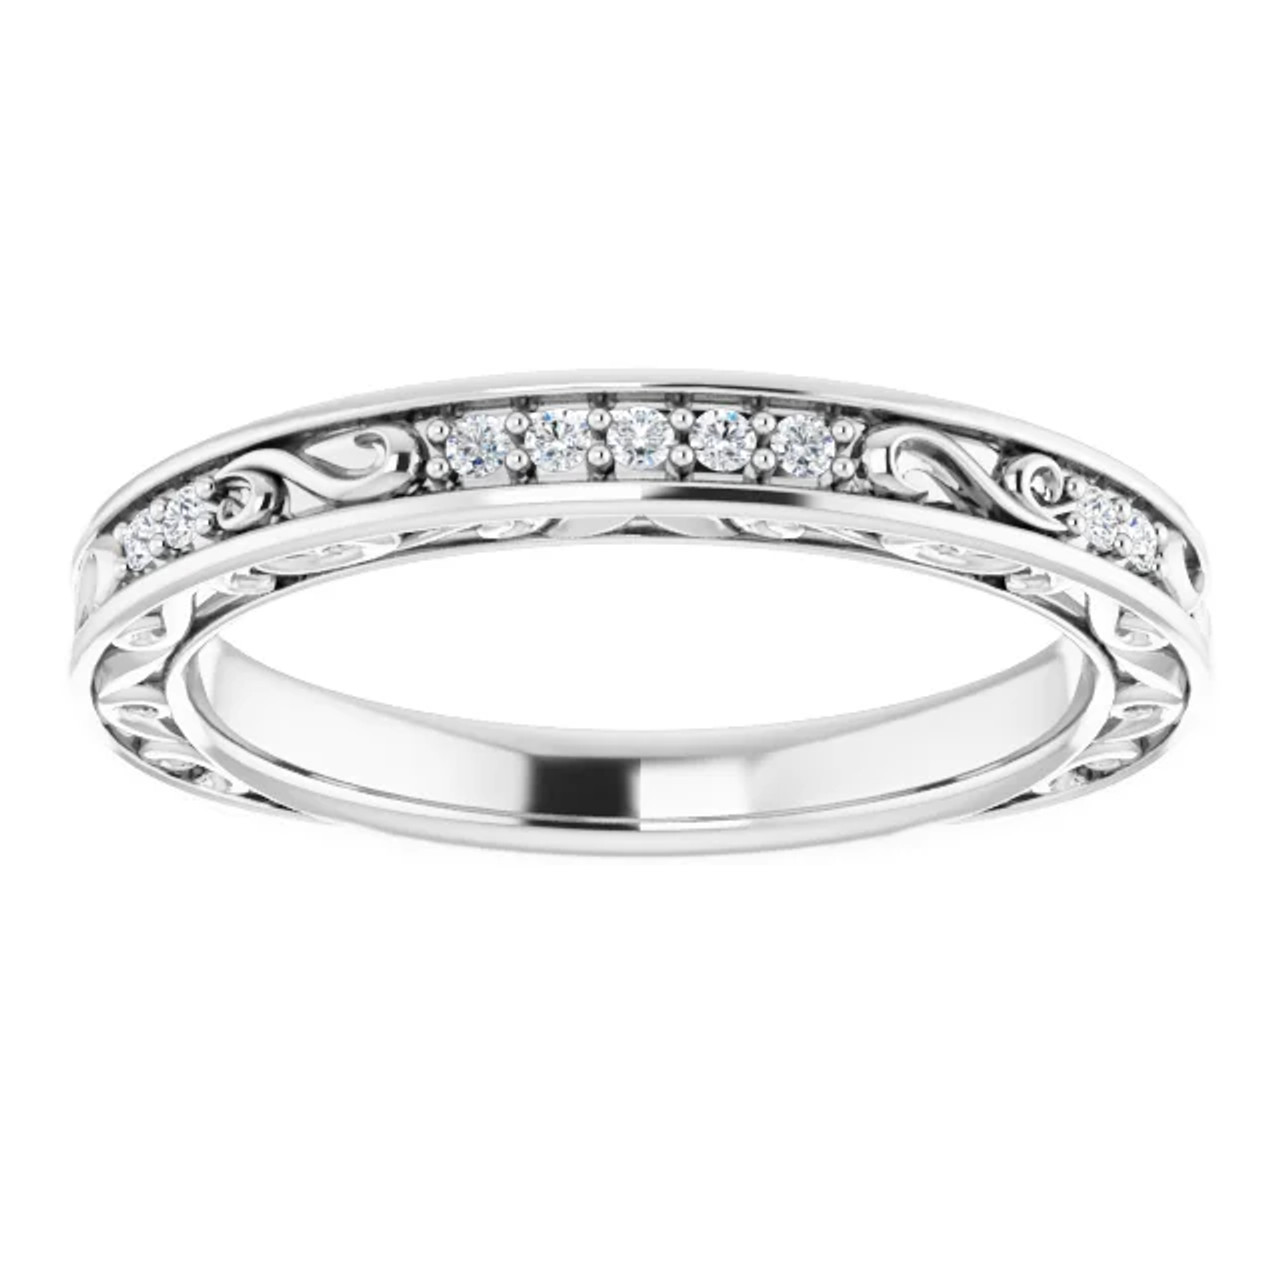 Sterling Silver and Cz Victorian Style Wedding Ring Band, Sizes 5 to 10 -  Walmart.com